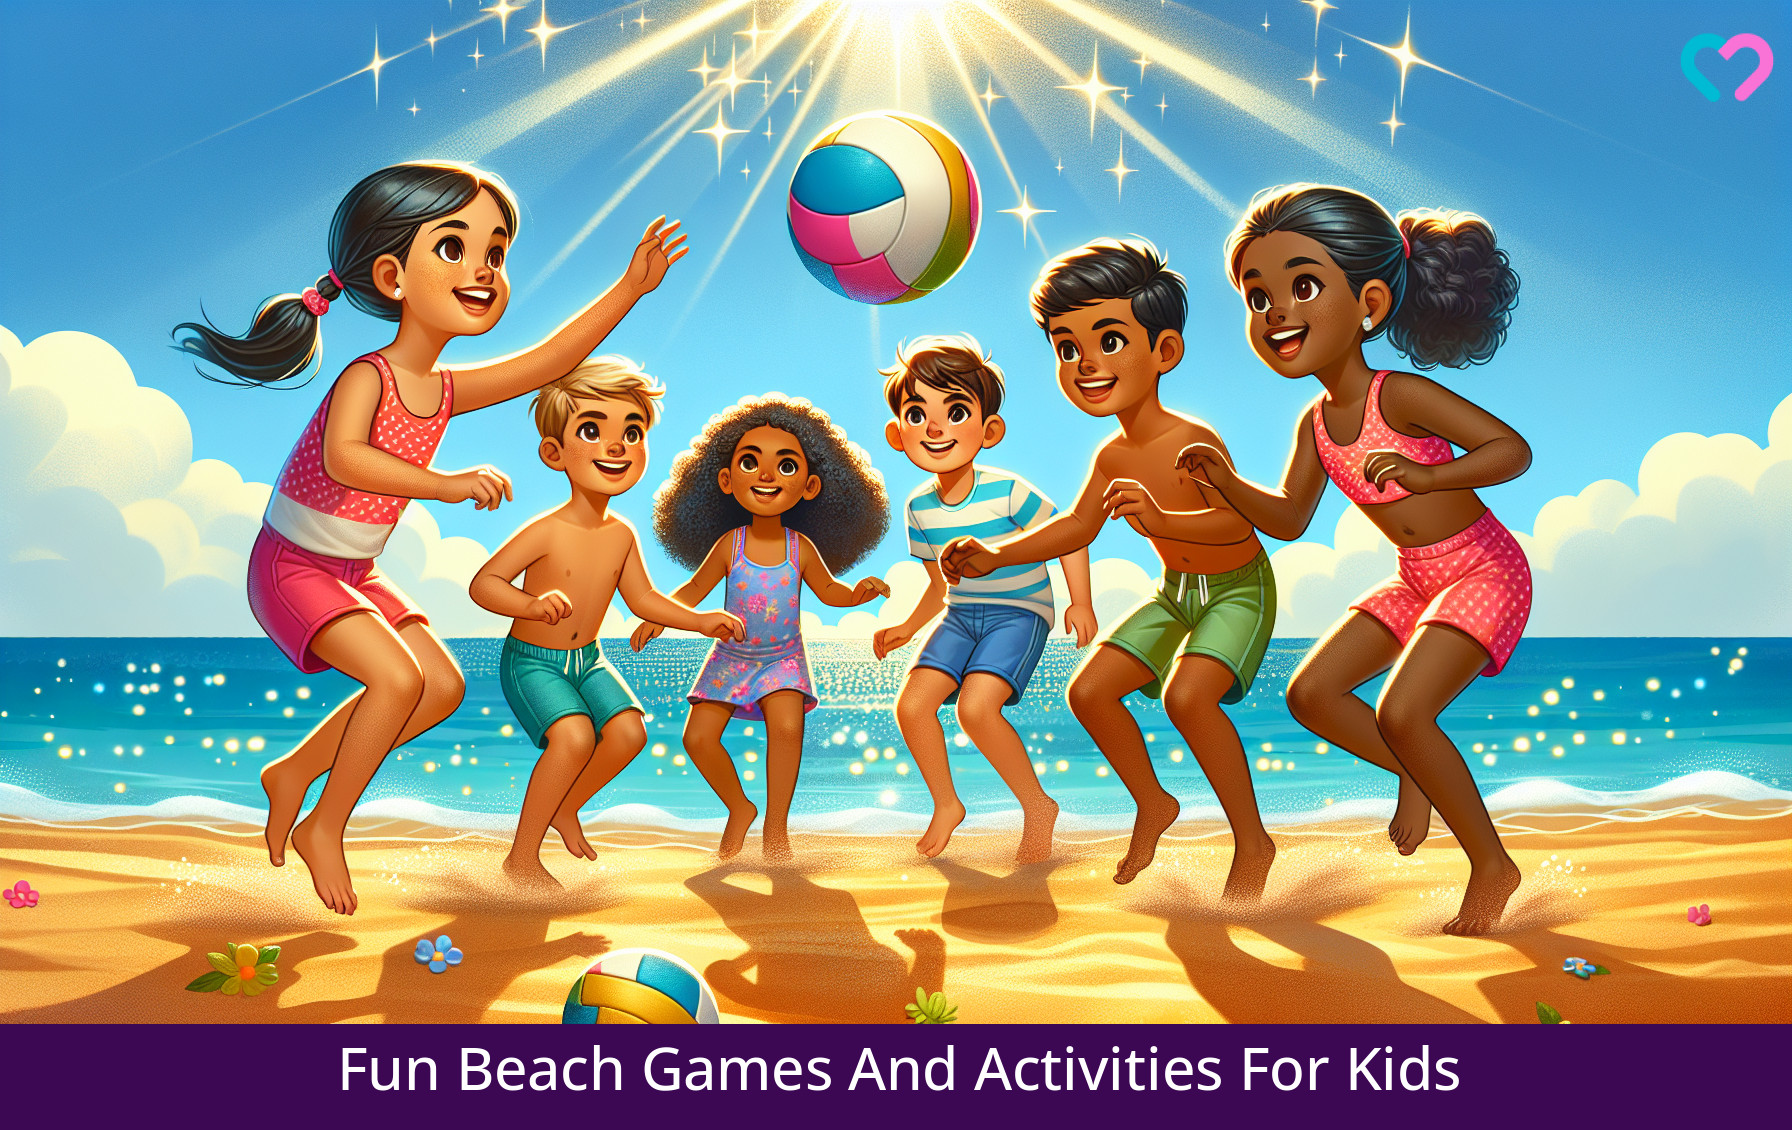 Beach Games And Activities For Kids_illustration